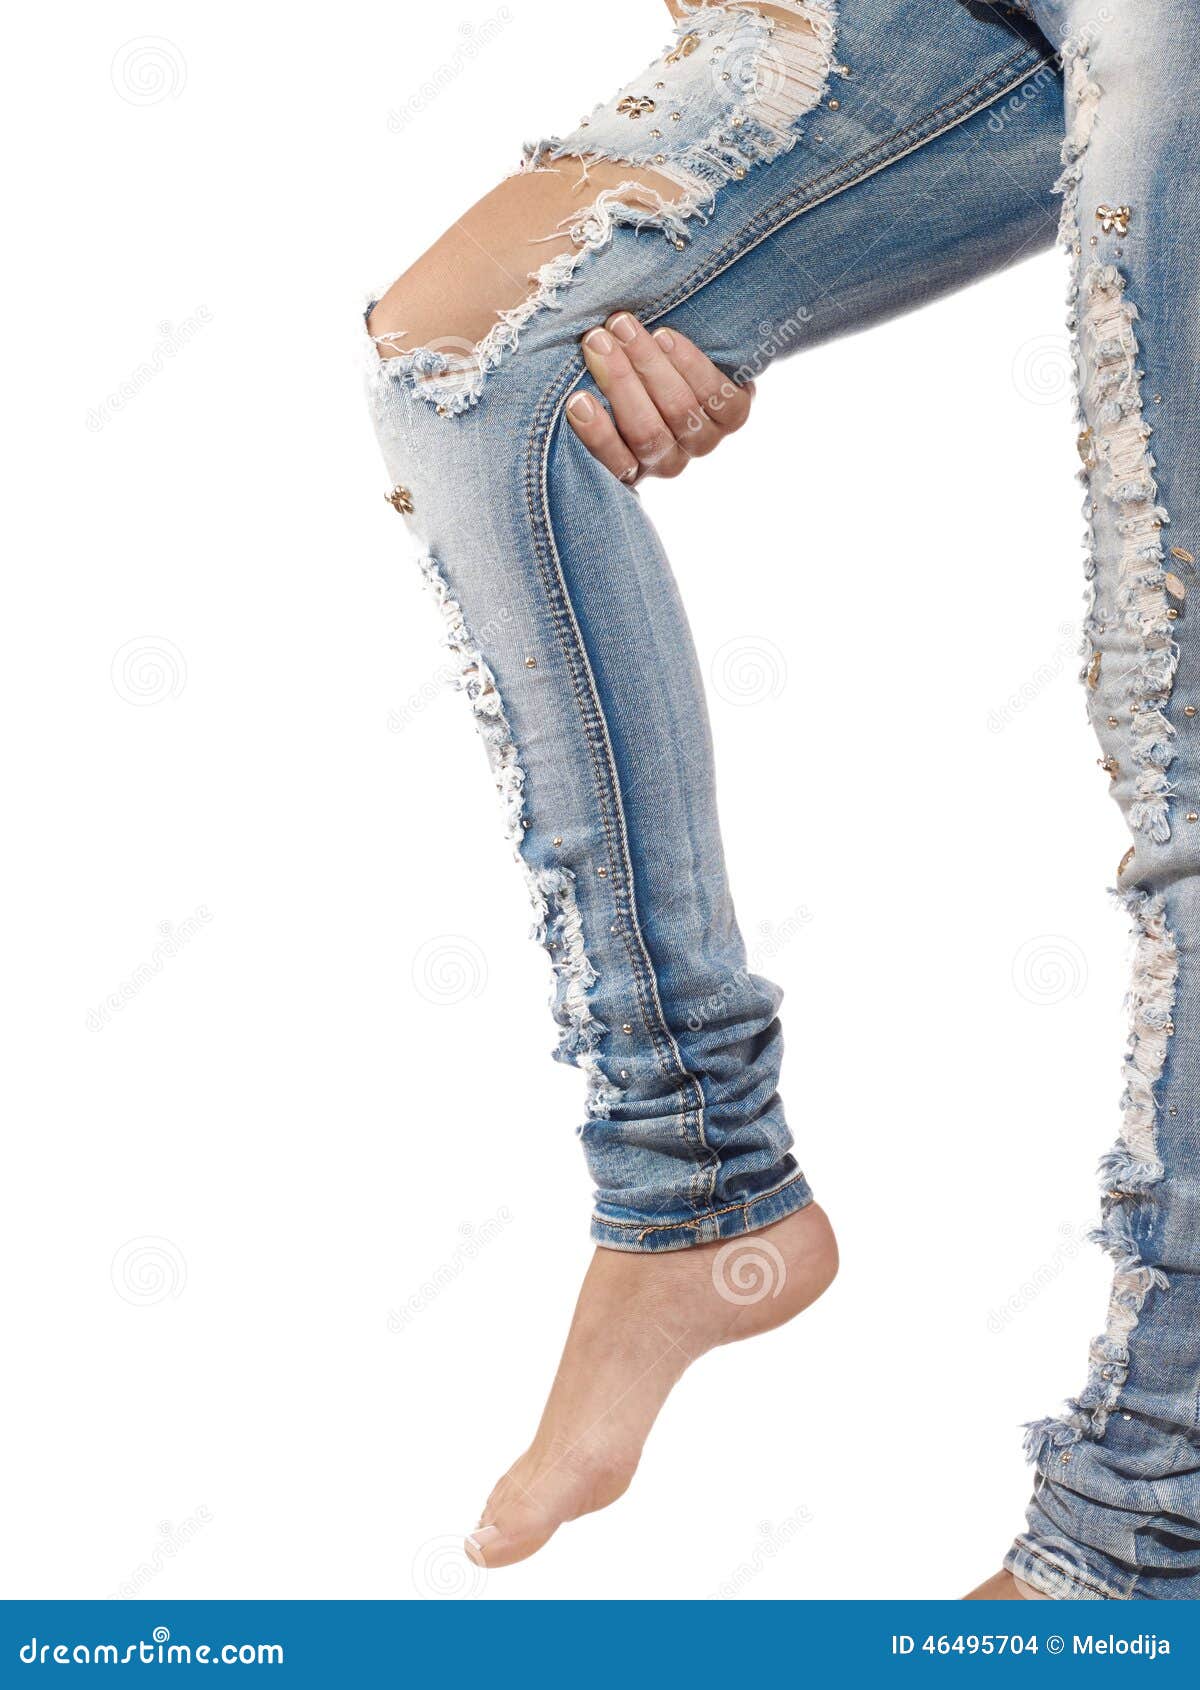 Human Knee Pain Medical Health Care Concept. Stock Photo - Image of ...